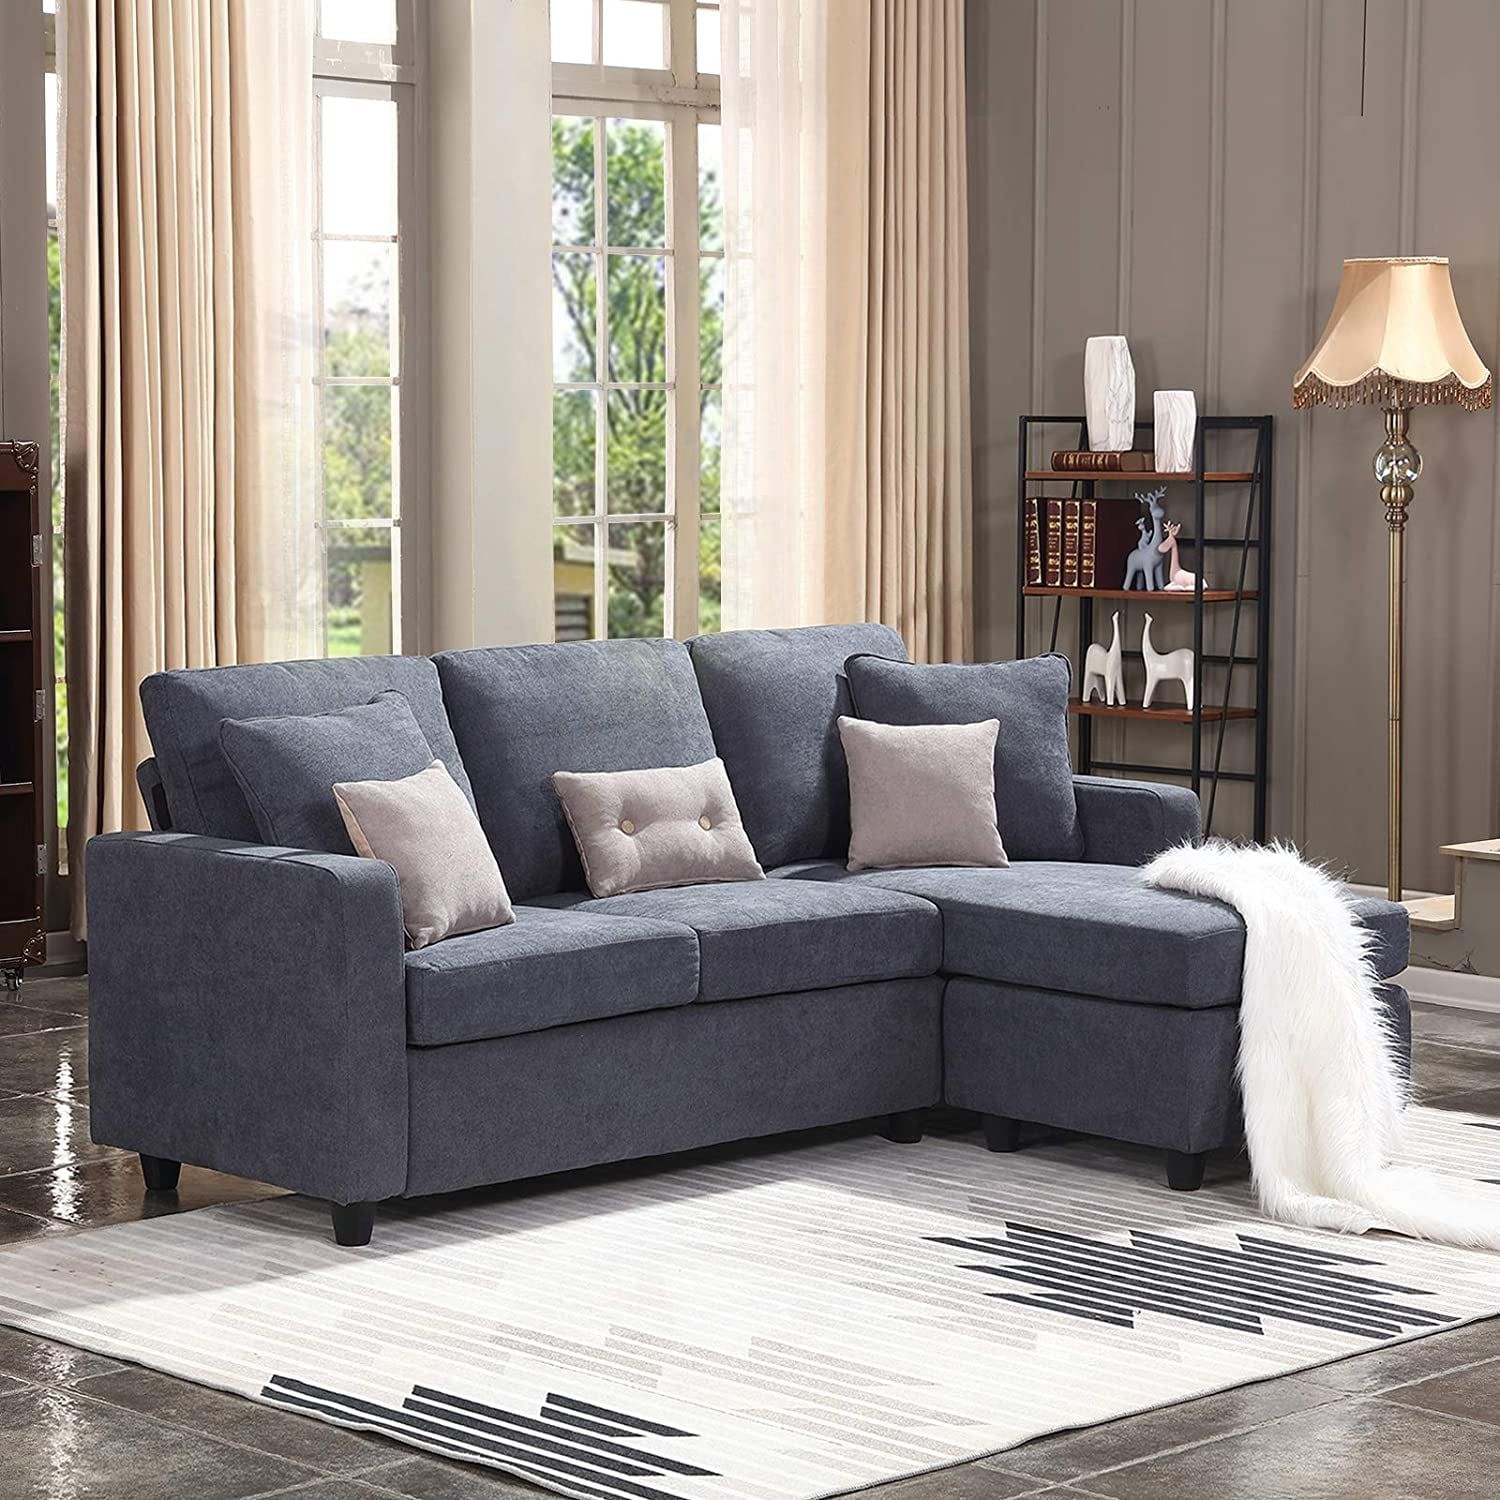 A Bestselling Sofa: Honbay Convertible Sectional Couch | The Most Popular  Home Products Customers Are Buying On Amazon | Popsugar Home Photo 7 Within Convertible Sectional Sofa Couches (Photo 13 of 15)